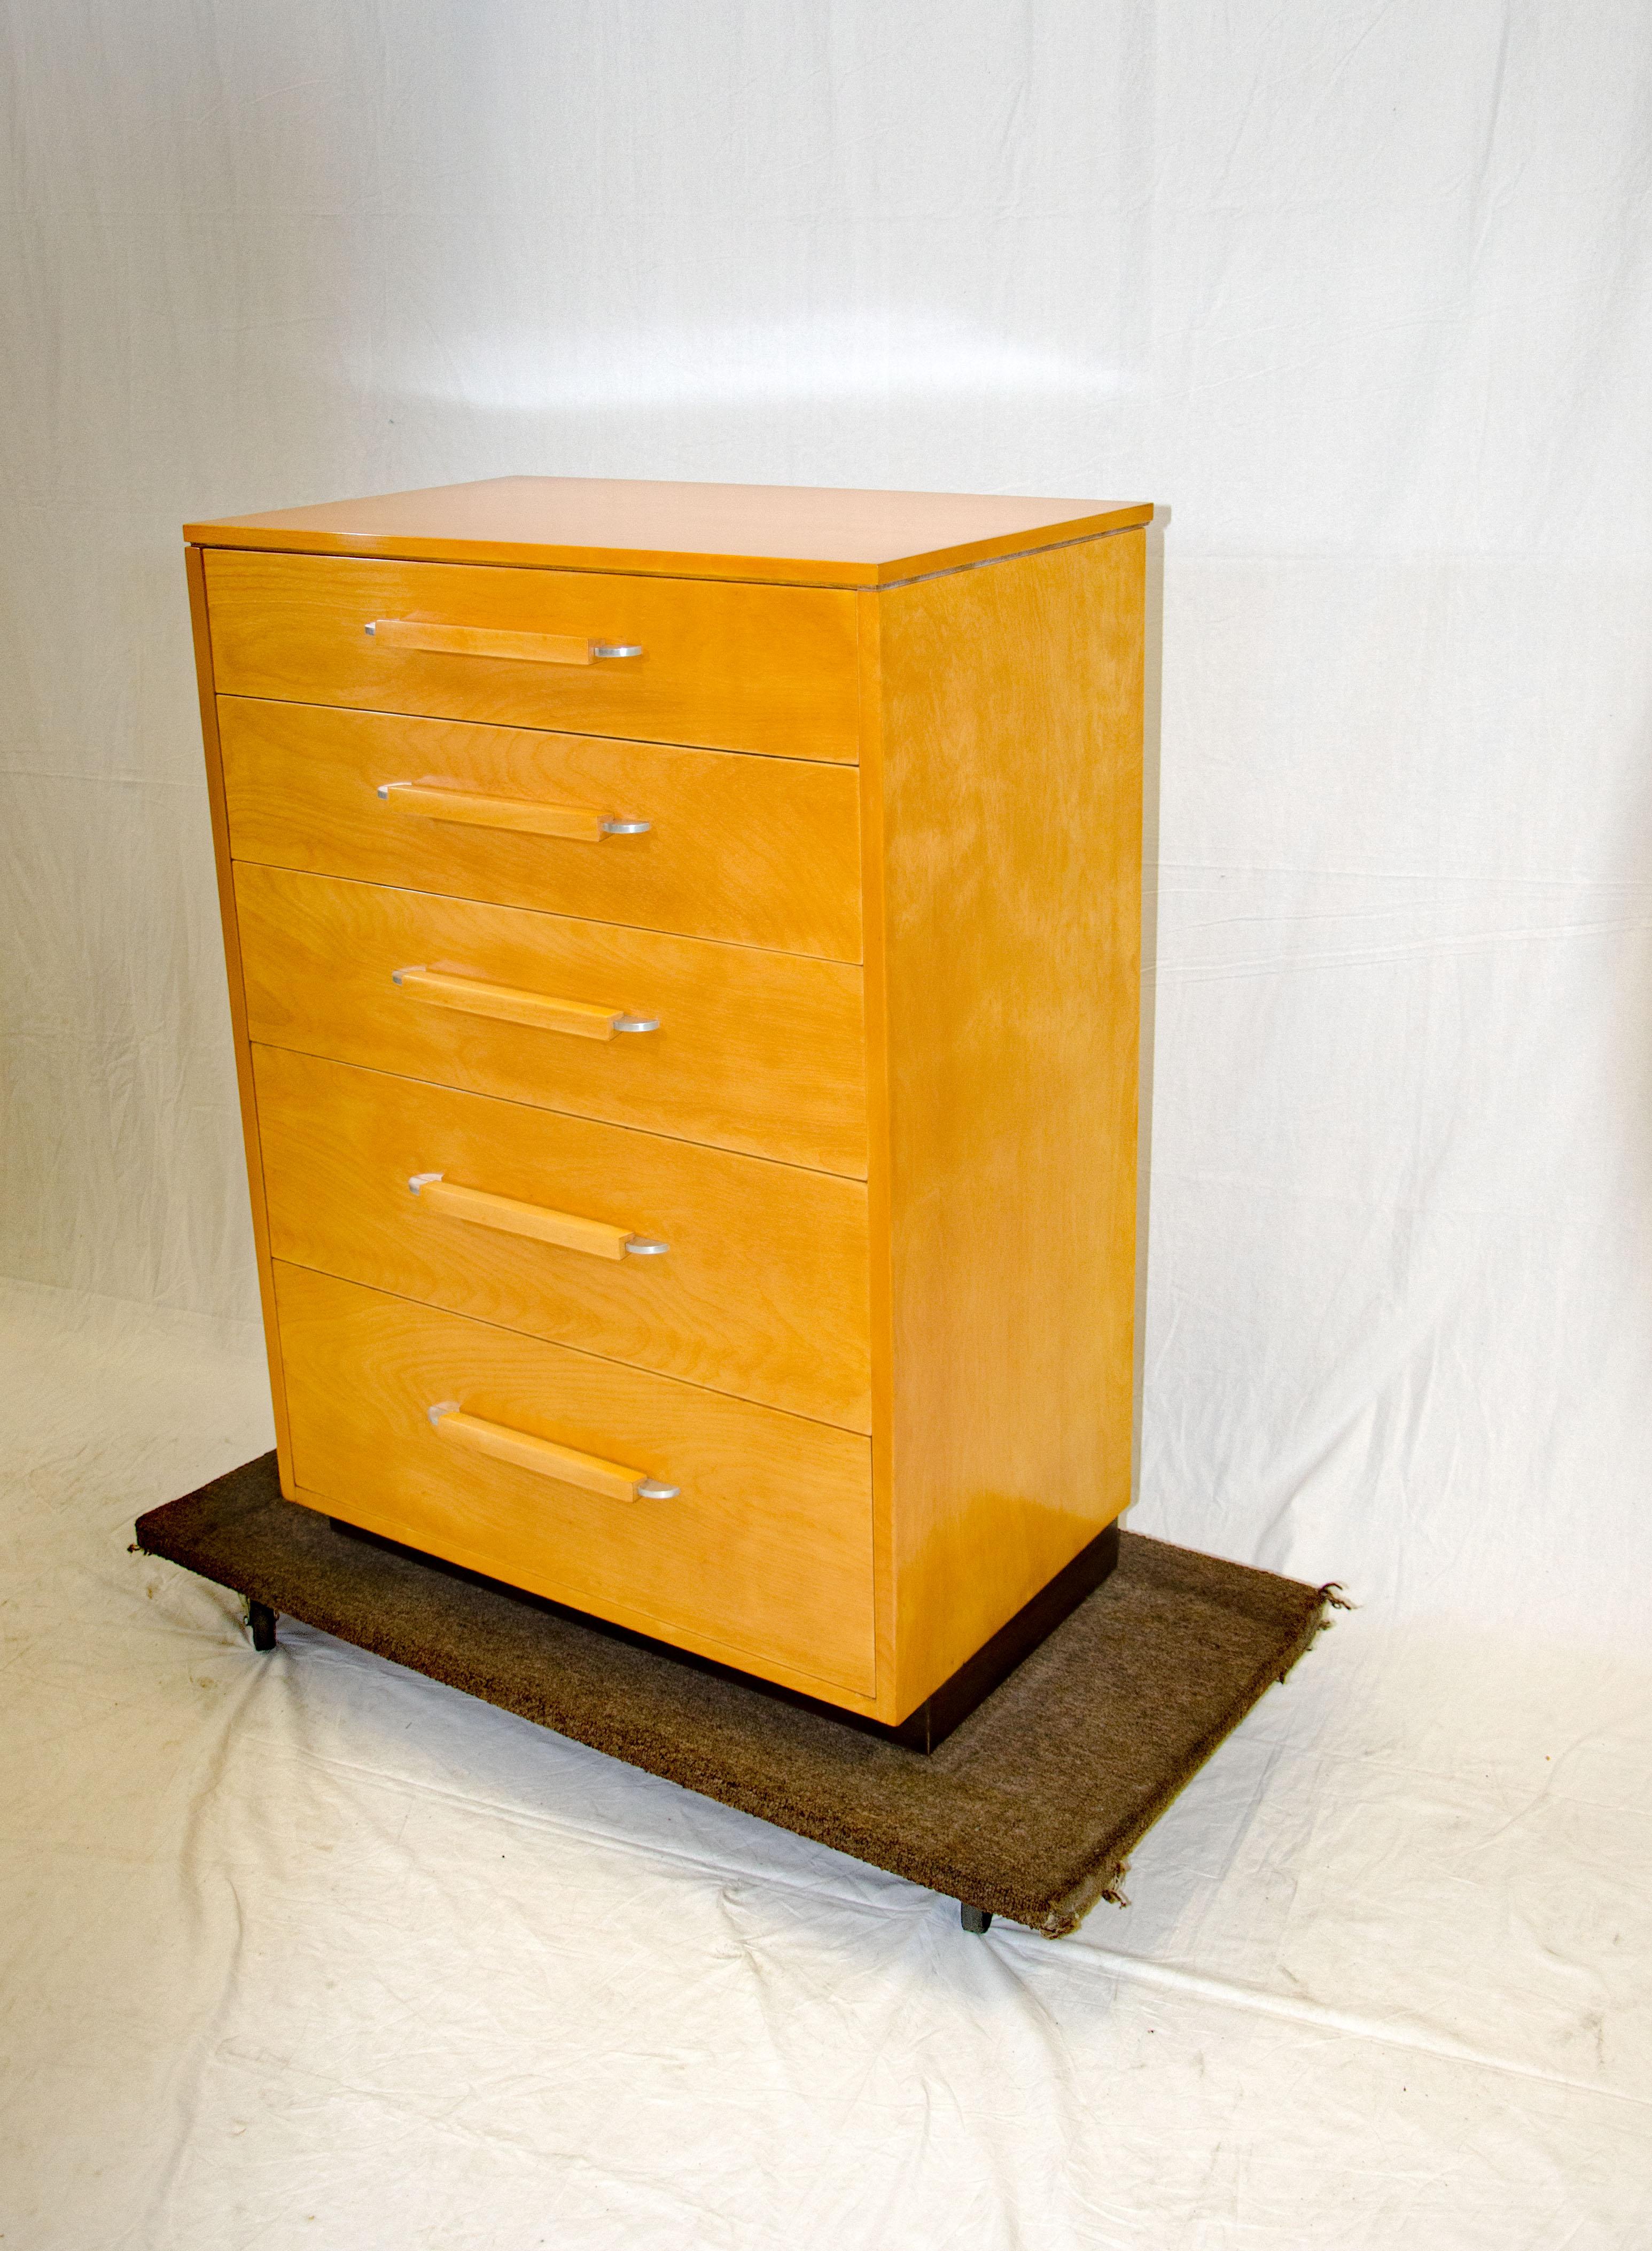 This highboy dresser design is from the FHA (Flexible Home Arrangement) collection by Eliel Saarinen, in collaboration with Eva-Lisa (Pipsan) Saarinen Swanson and J. Robert F. Swanson. The extended back edge of the top allows for snug placement